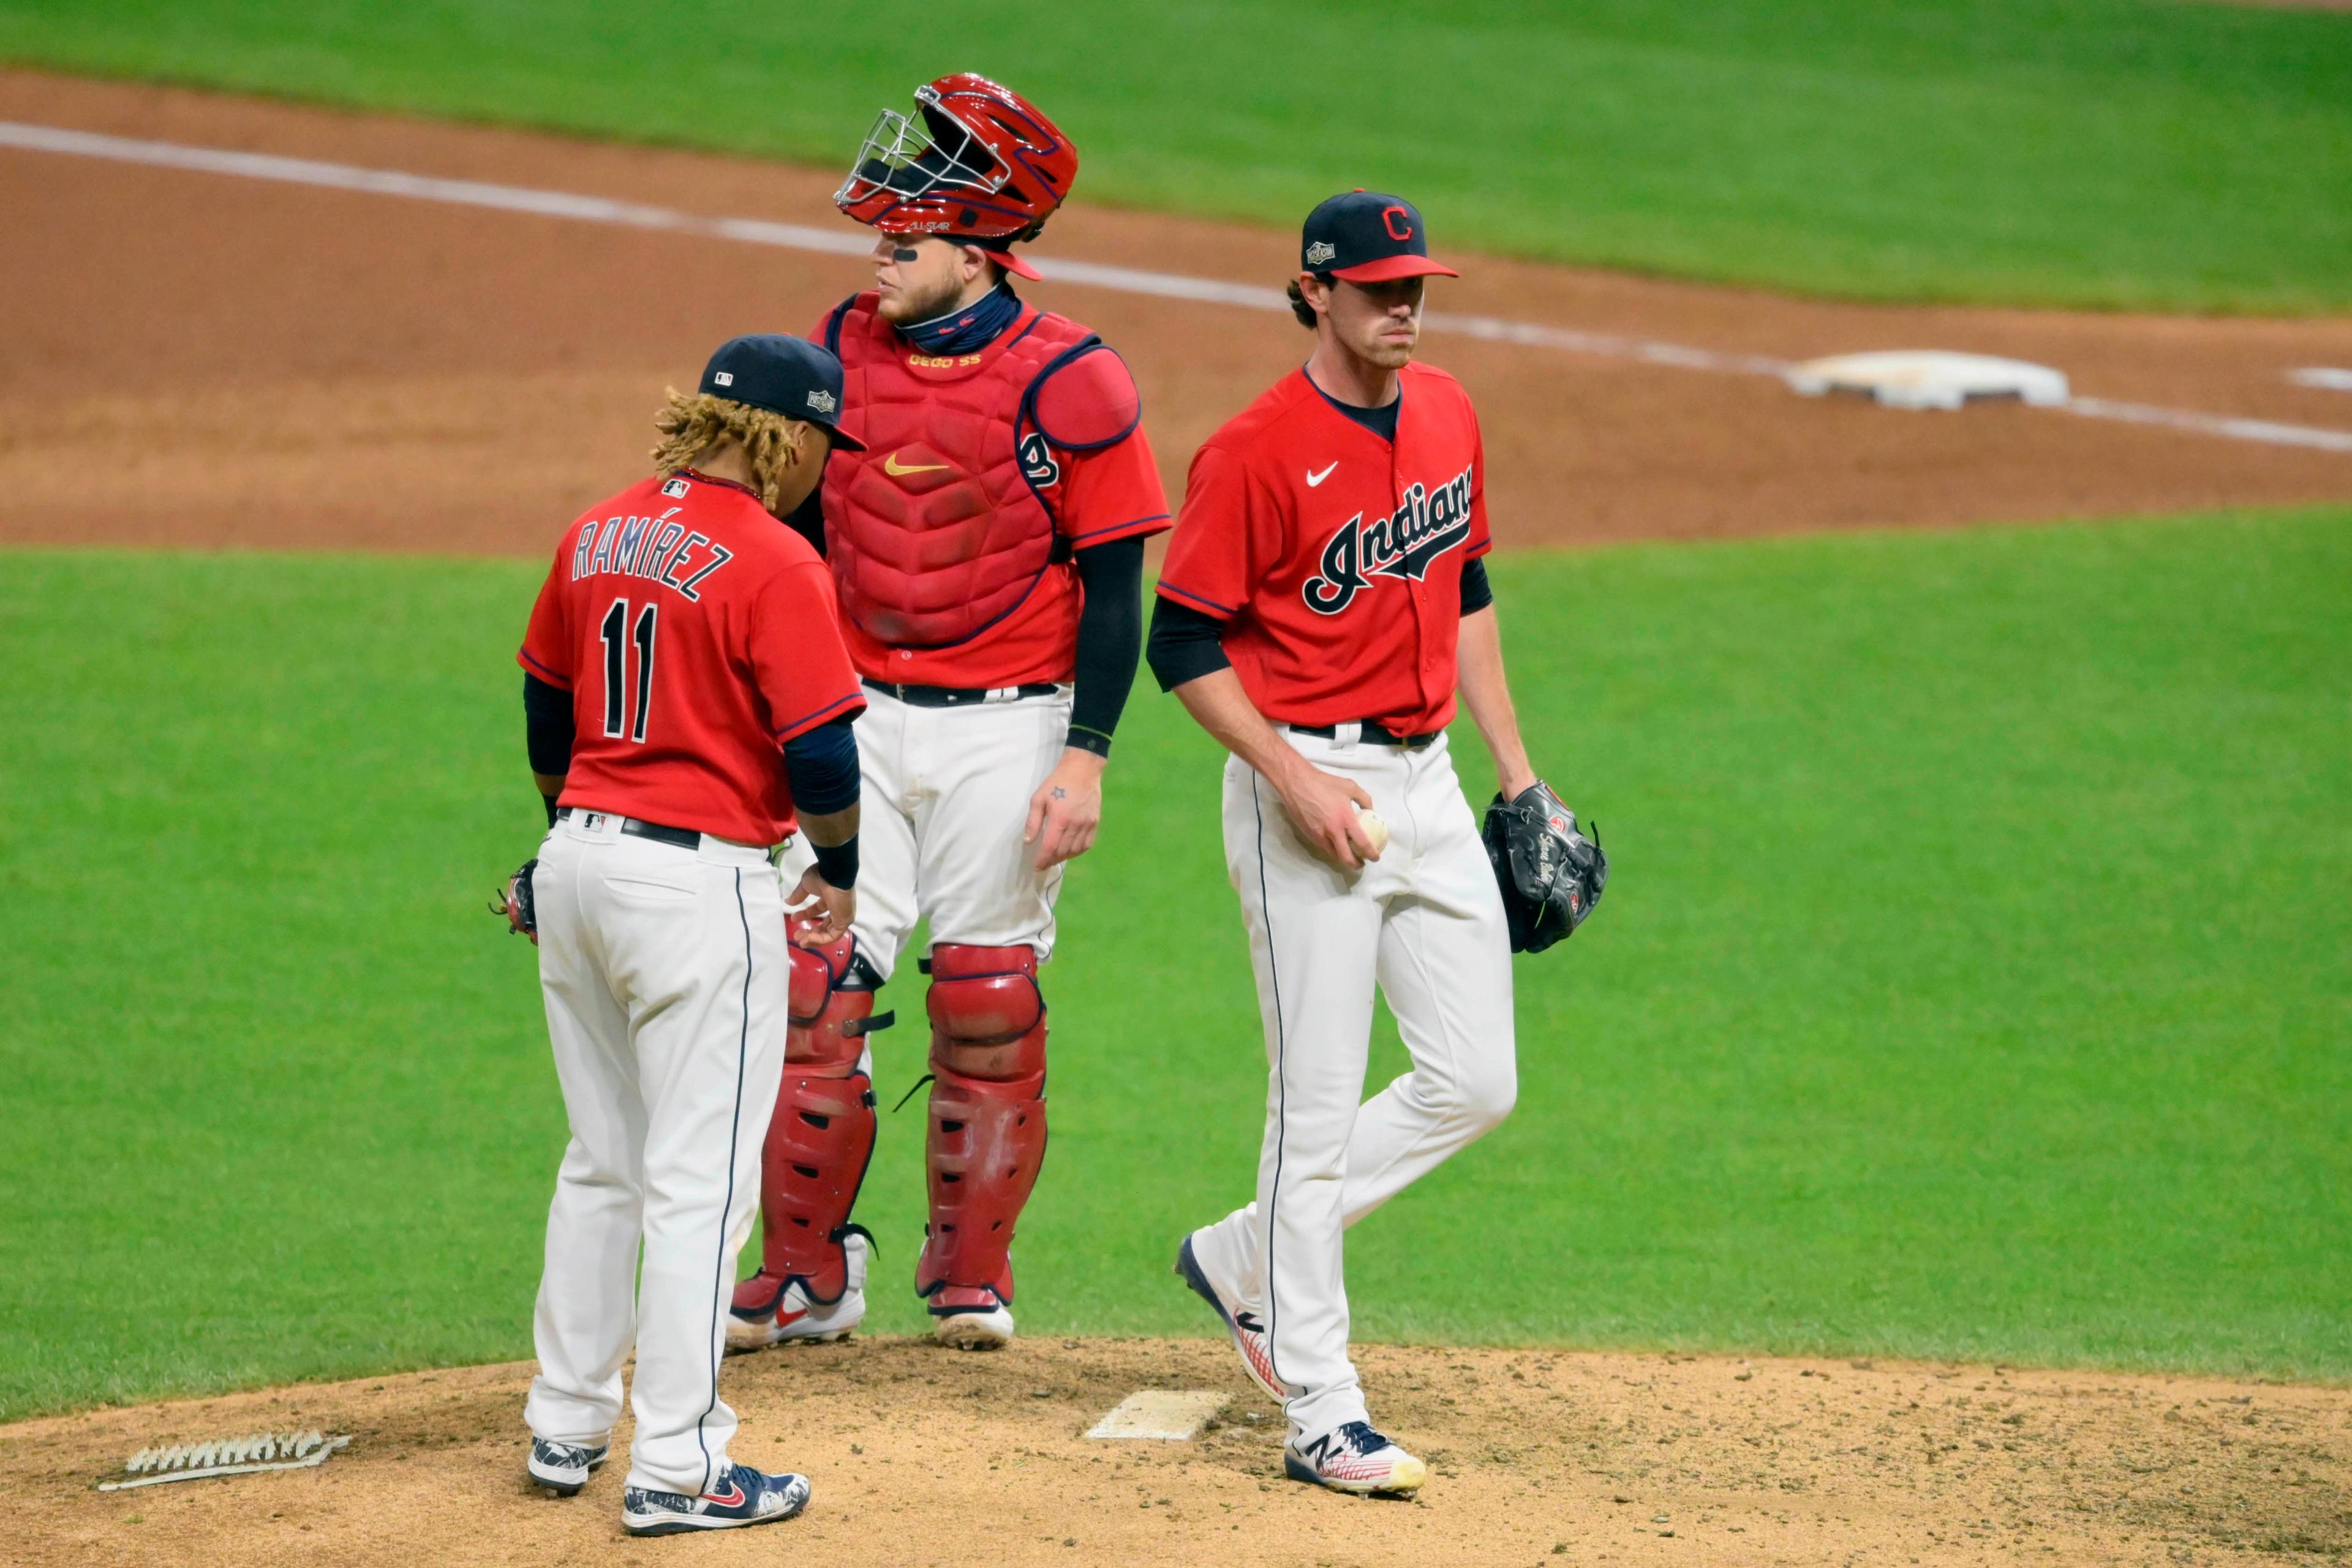 Sep 29, 2020; Cleveland, Ohio, USA; Cleveland Indians third baseman Jose Ramirez (11) and catcher Roberto Perez (middle) react as starting pitcher Shane Bieber (right) walks off the mound during a pitching change in the fifth inning against the New York Yankees at Progressive Field. Mandatory Credit: David Richard-USA TODAY Sports / © David Richard-USA TODAY Sports